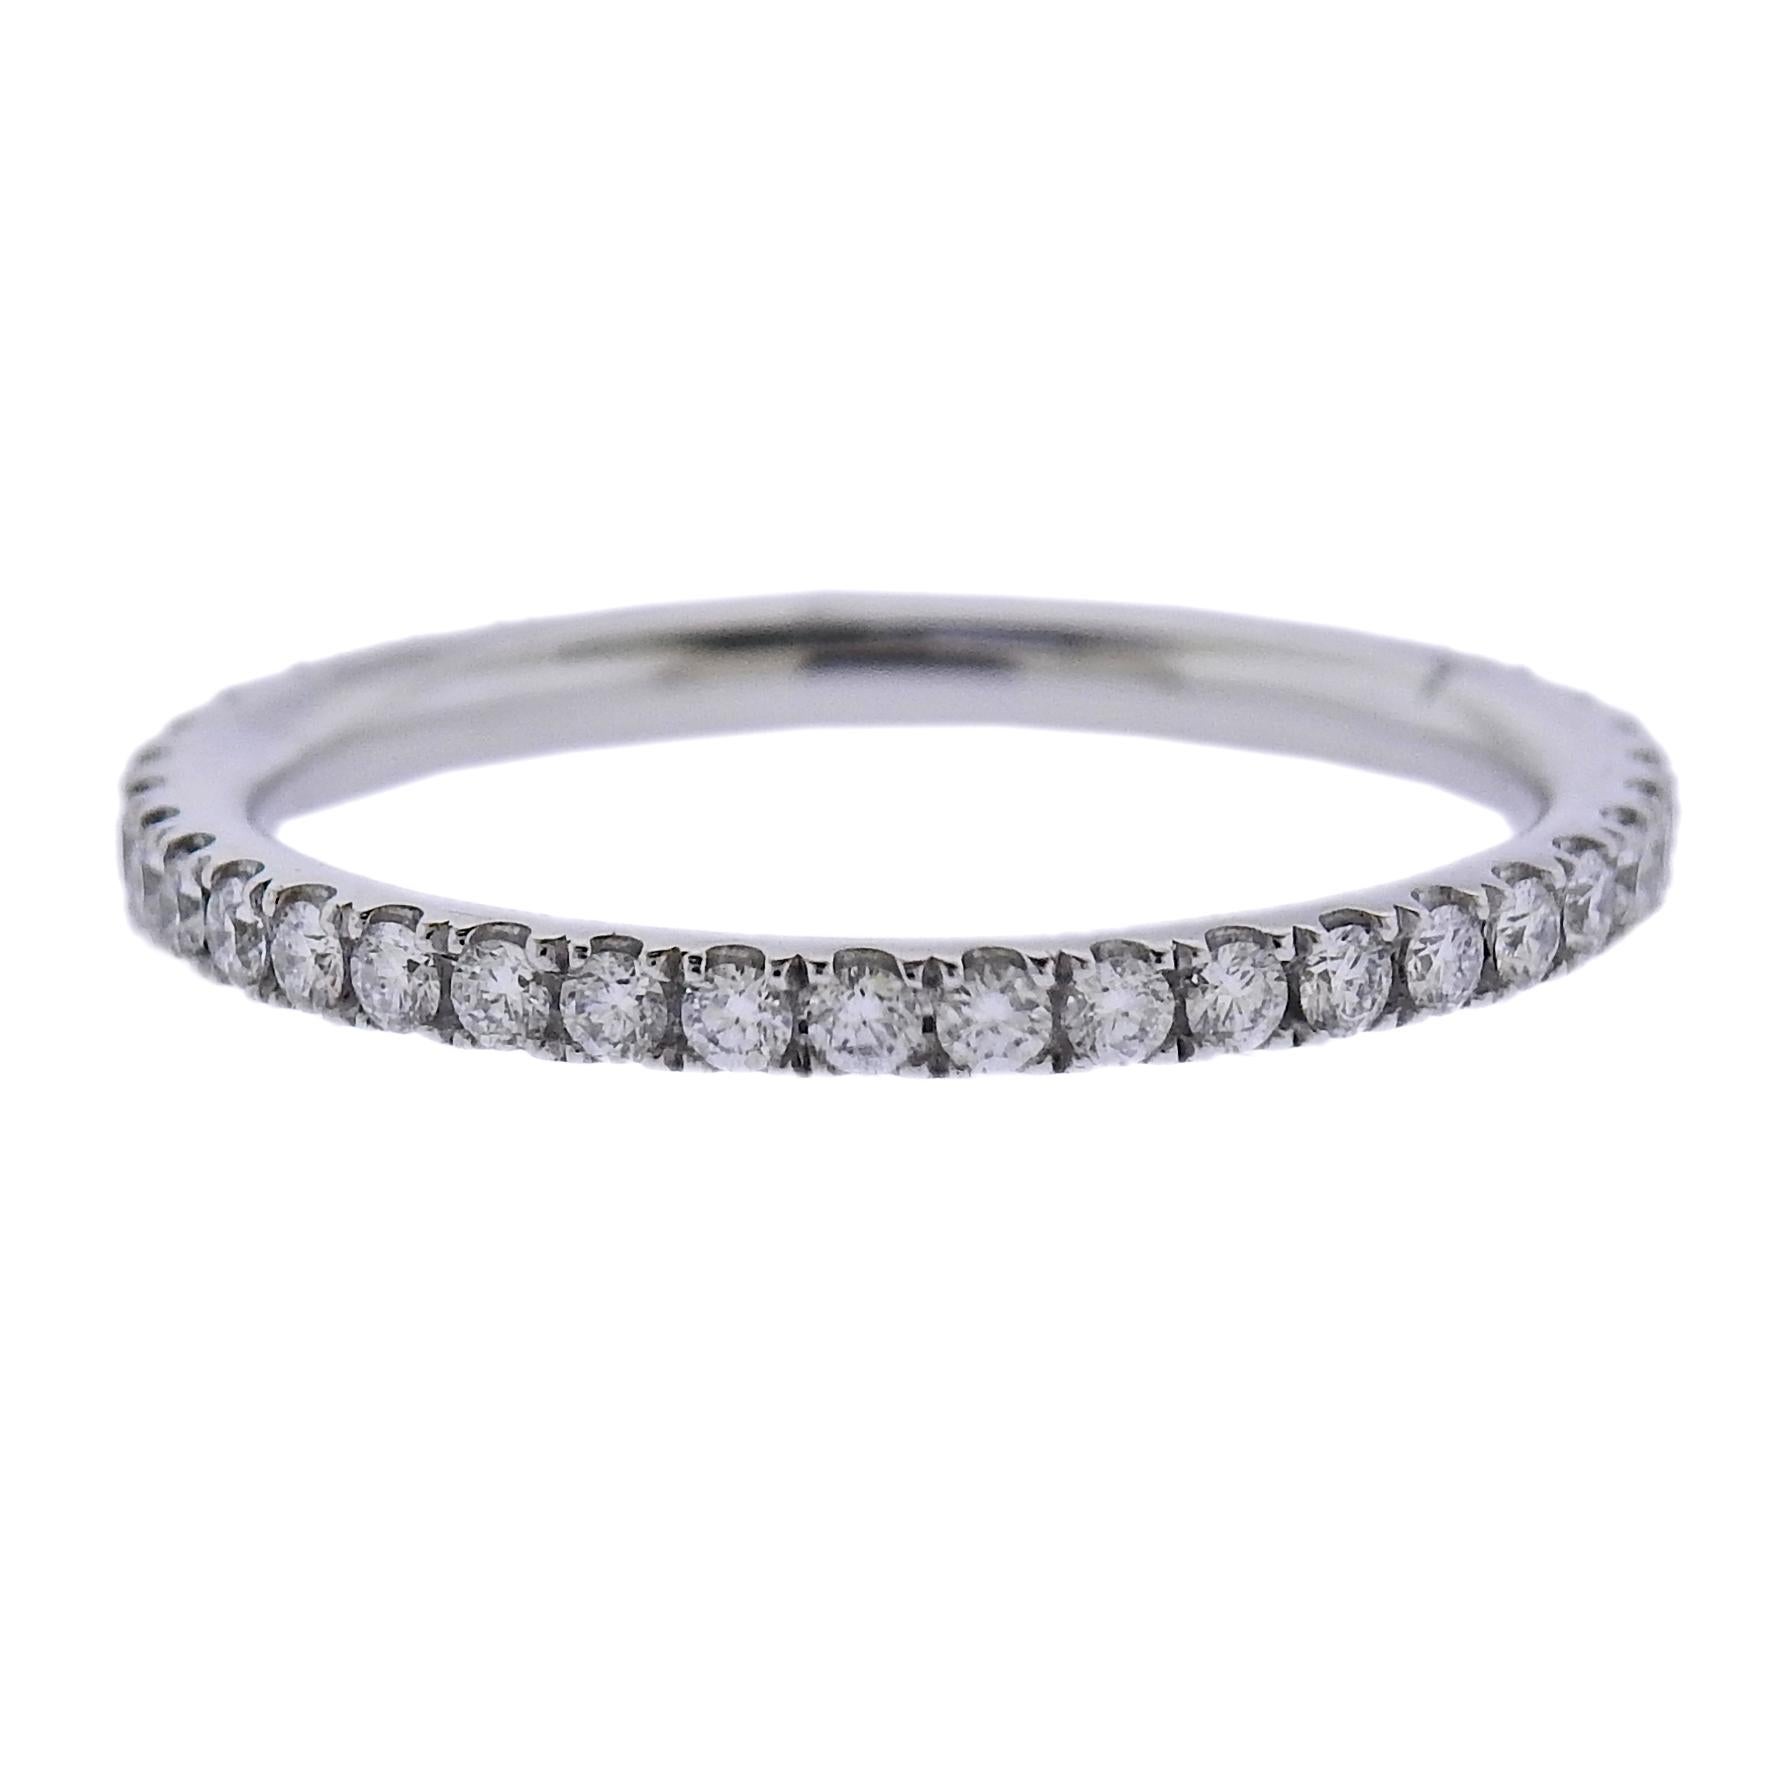 Brand new 18k white gold Aurora wedding band ring by Georg Jensen, with approx. 0.49ctw G/VS diamonds. Model #3572540. Ring is 2mm wide, Available in sizes: 51,53. Marked: GJ, 750, ring size. Weight 2 grams.